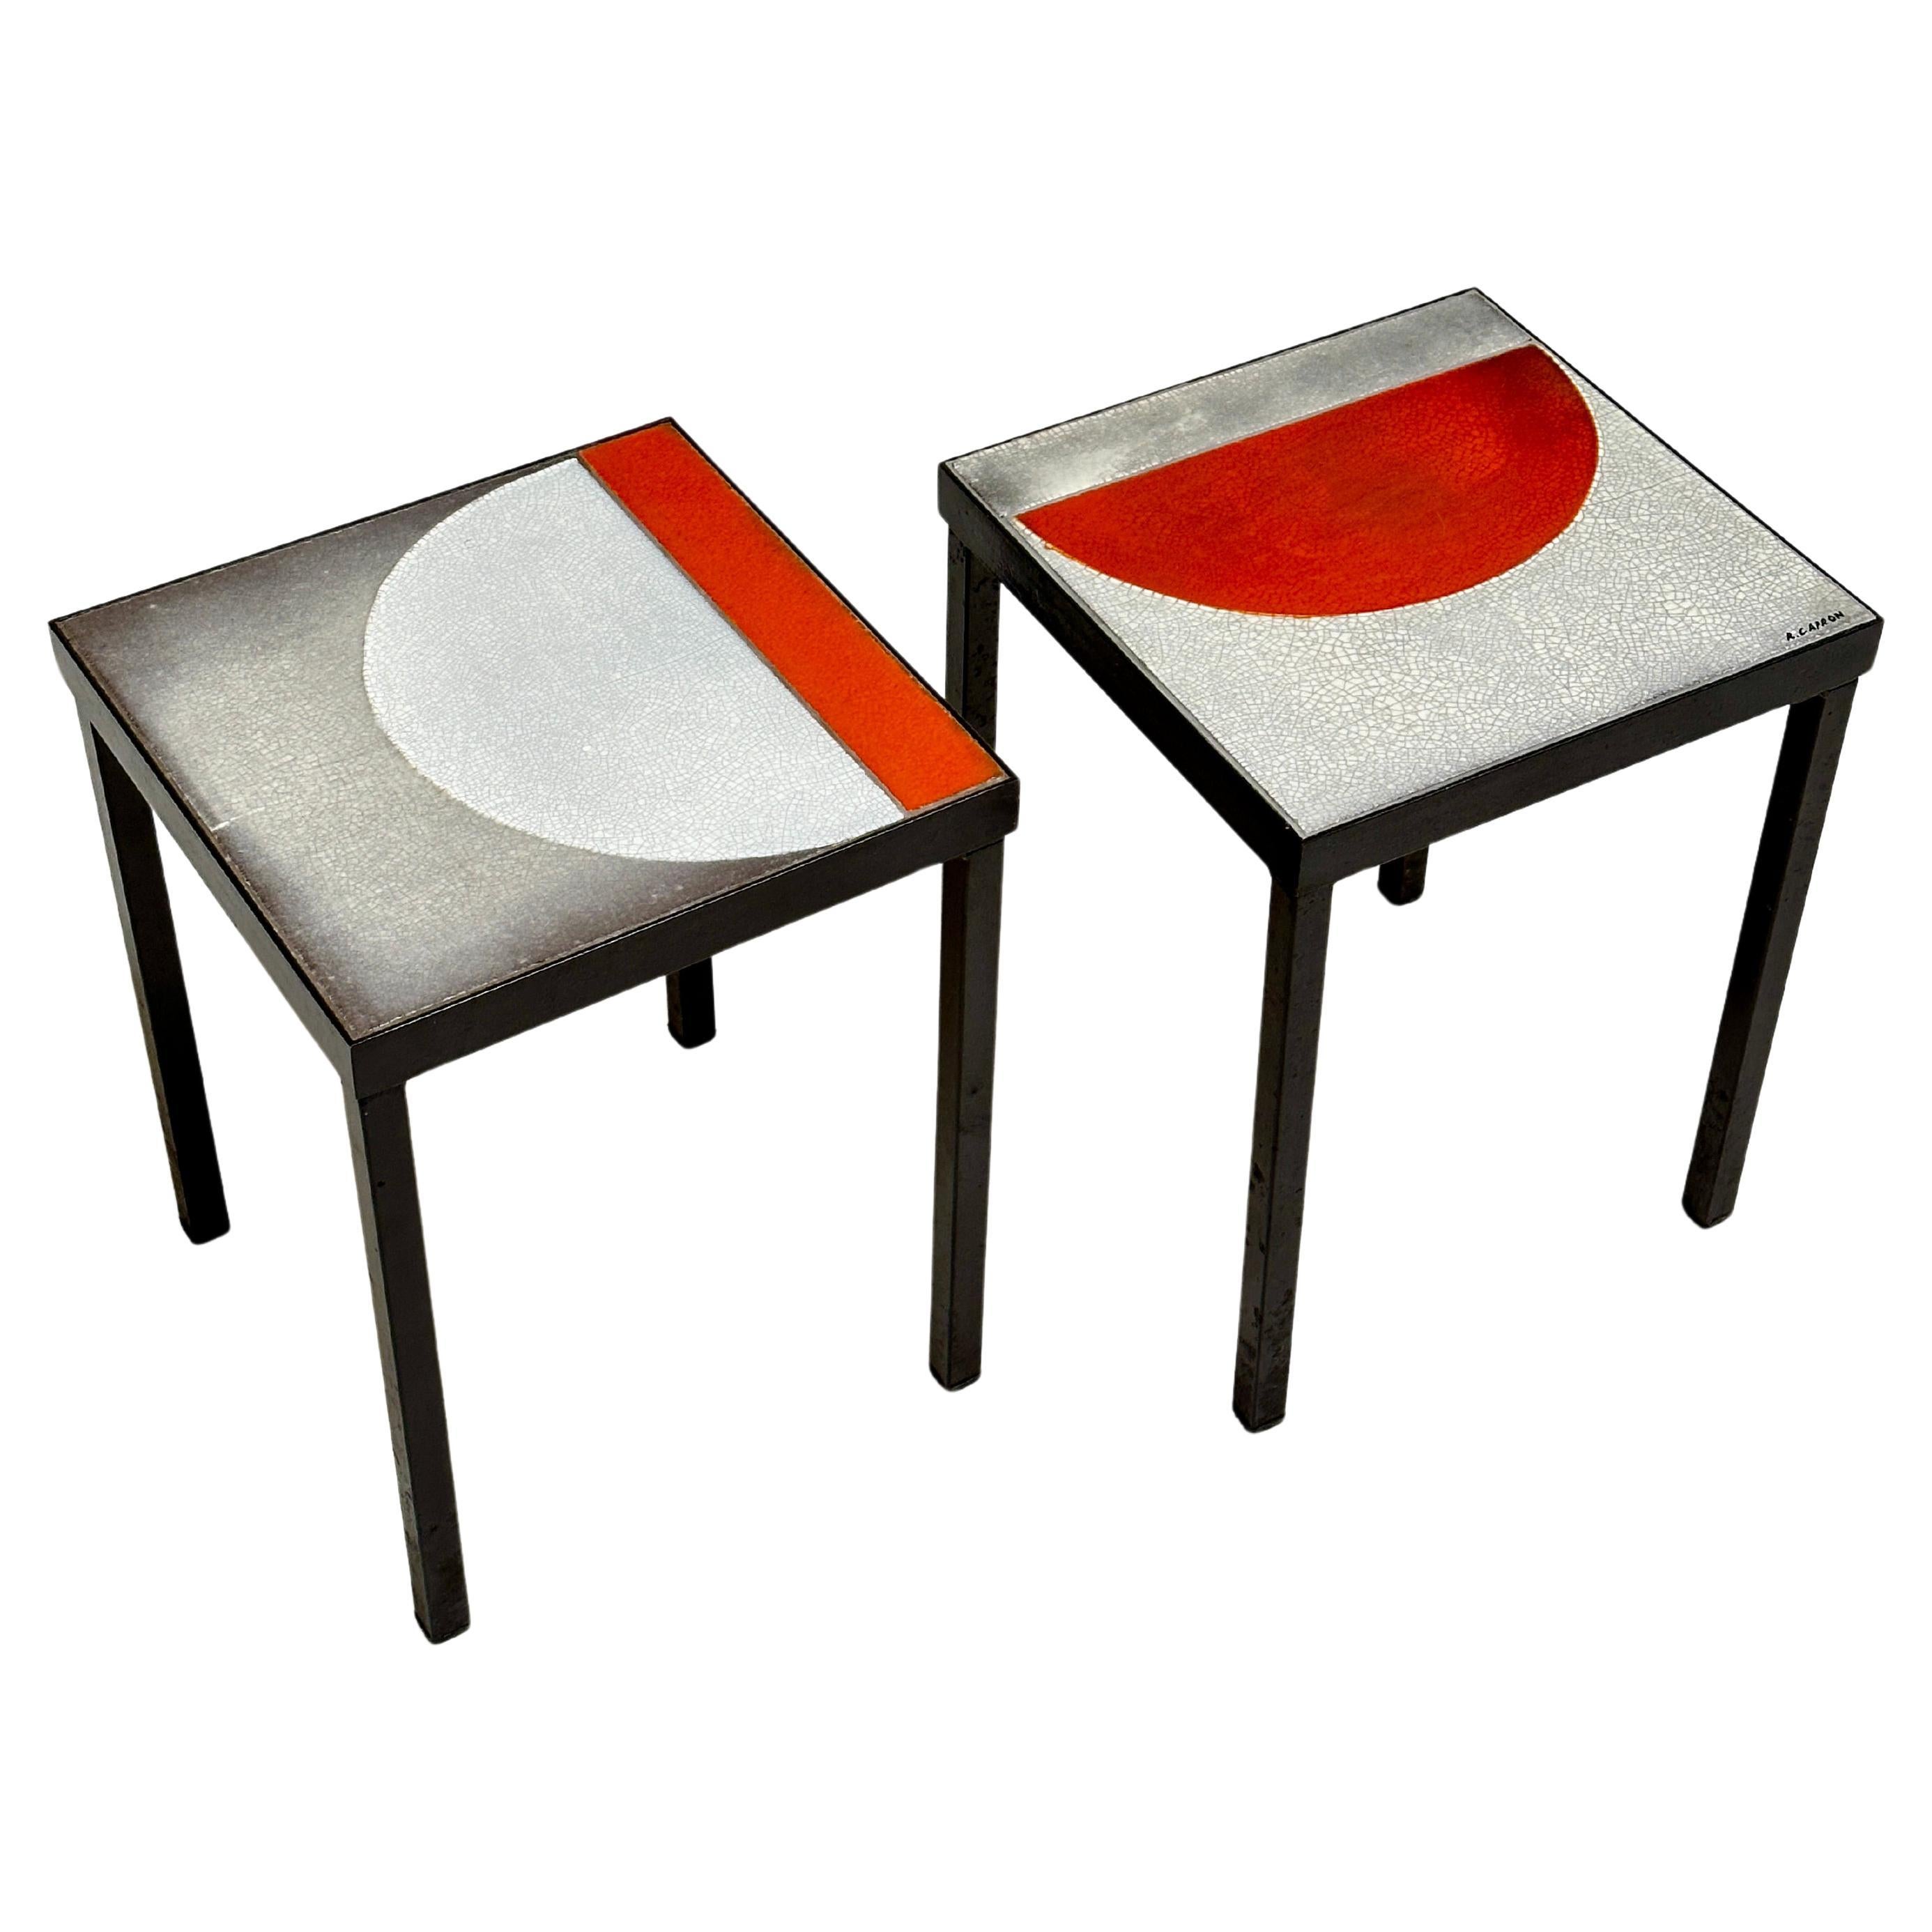 Pair of Low Tables, Roger Capron, Vallauris, c. 1965 For Sale